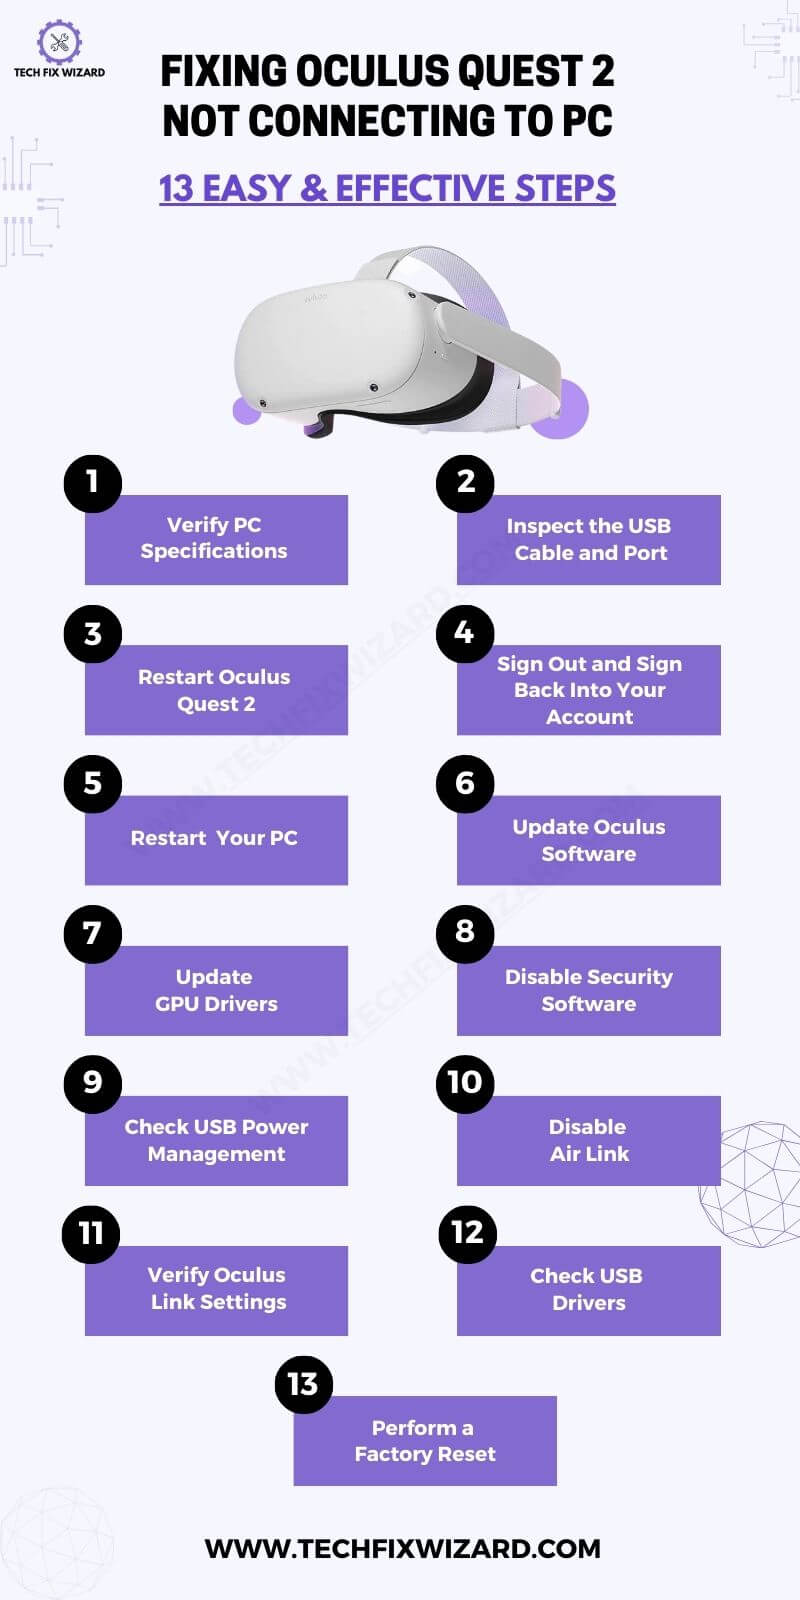 Oculus Quest 2 Not Connecting To PC infographic